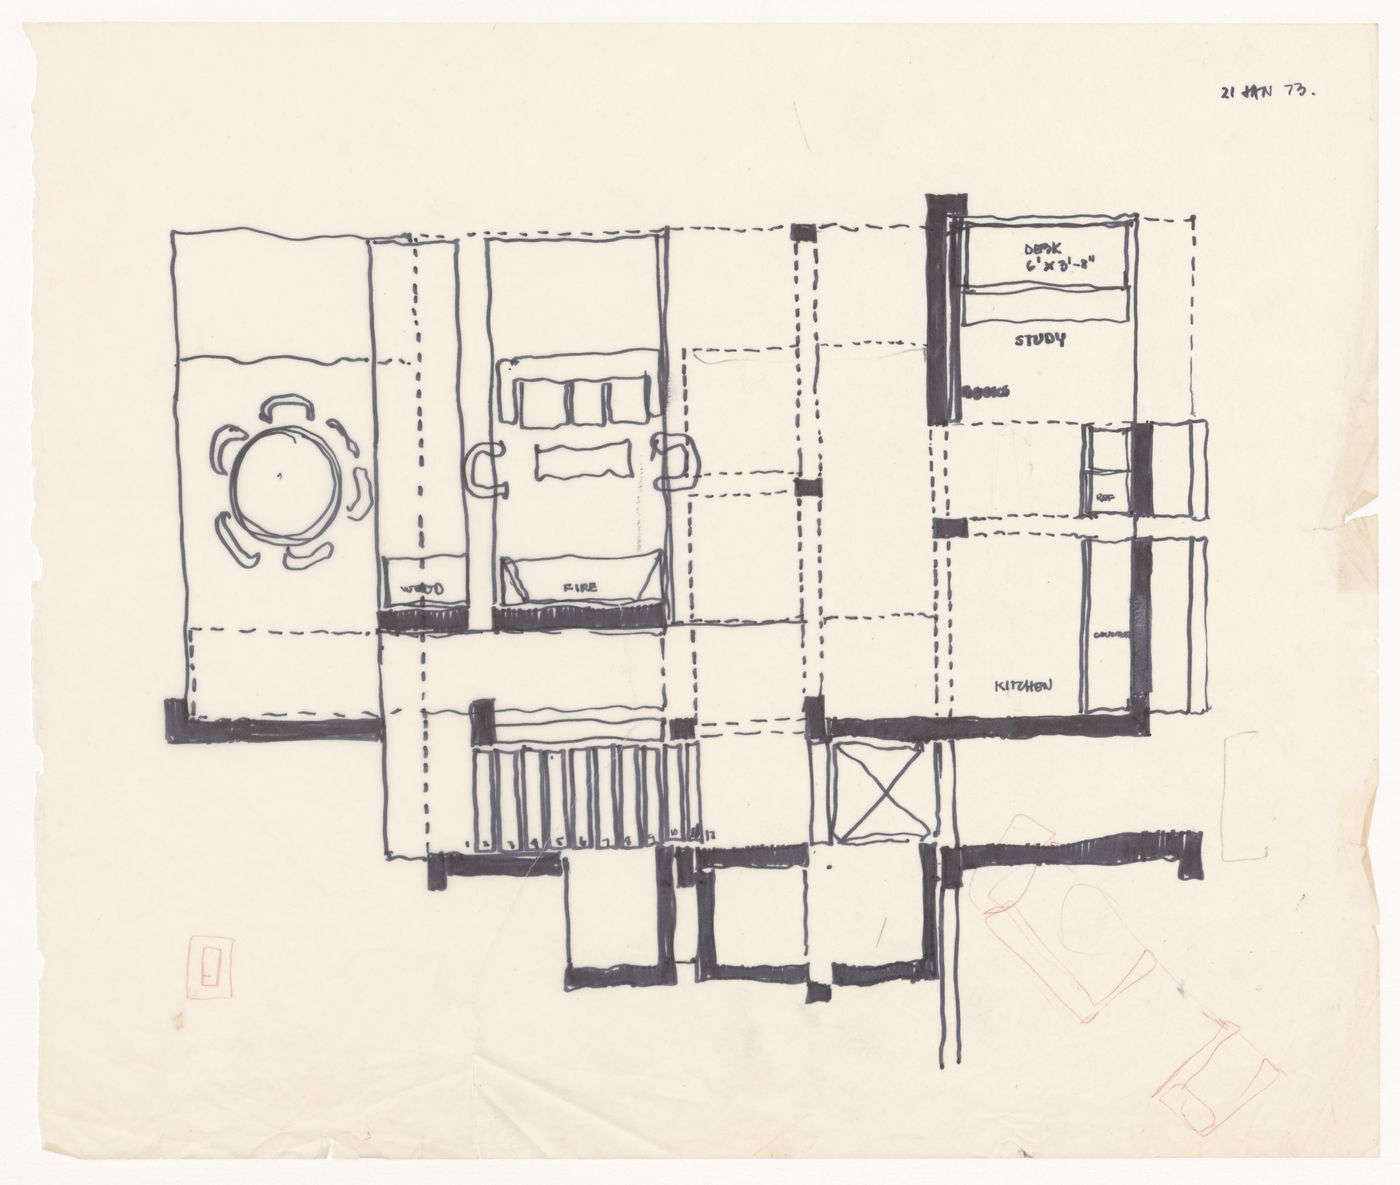 Sketch plan for House VI, Cornwall, Connecticut